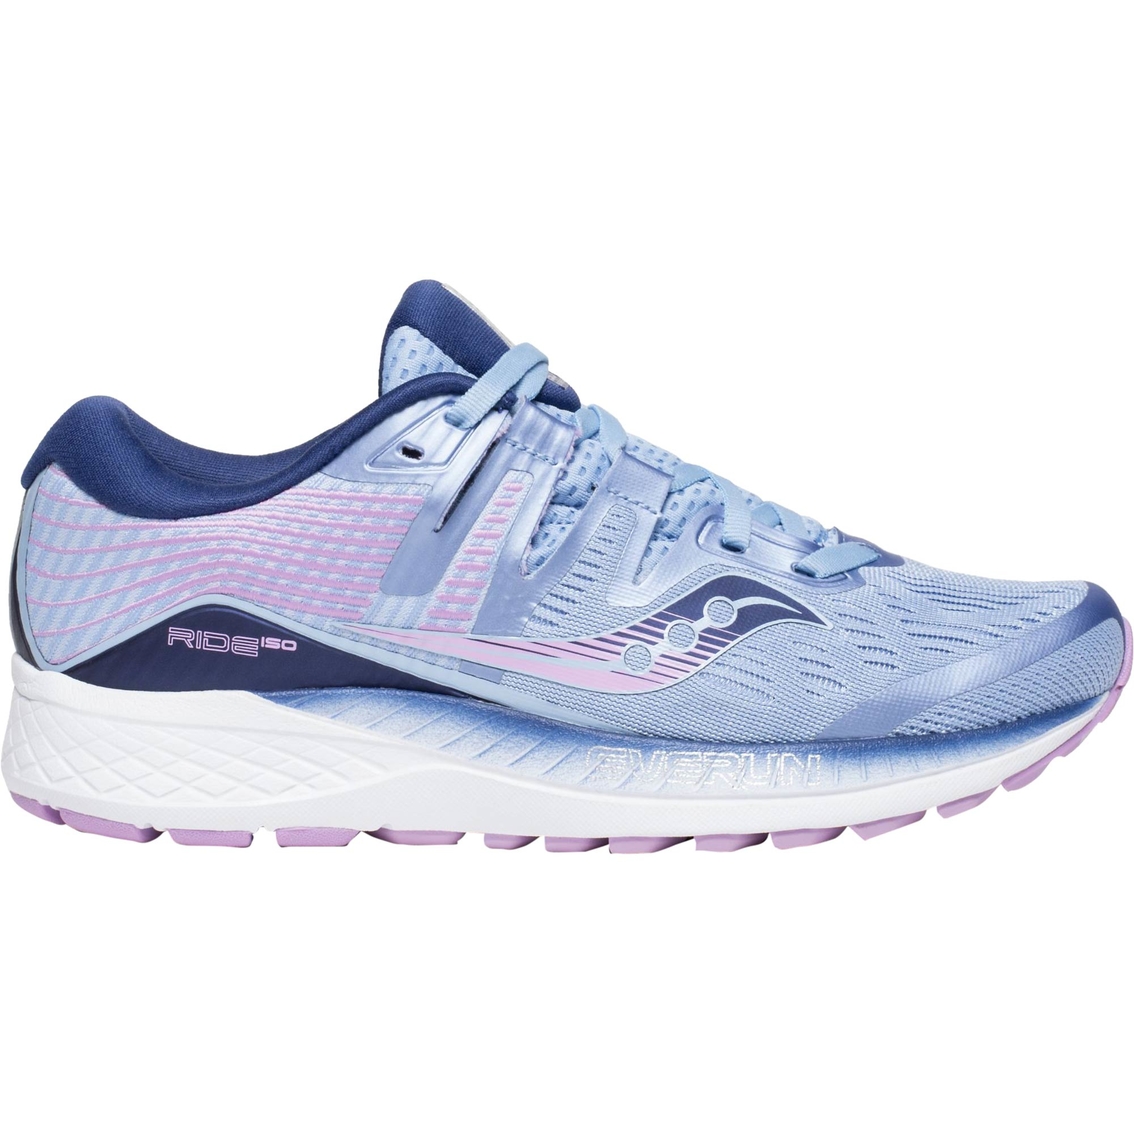 Saucony Women's Ride Iso Running Shoes 